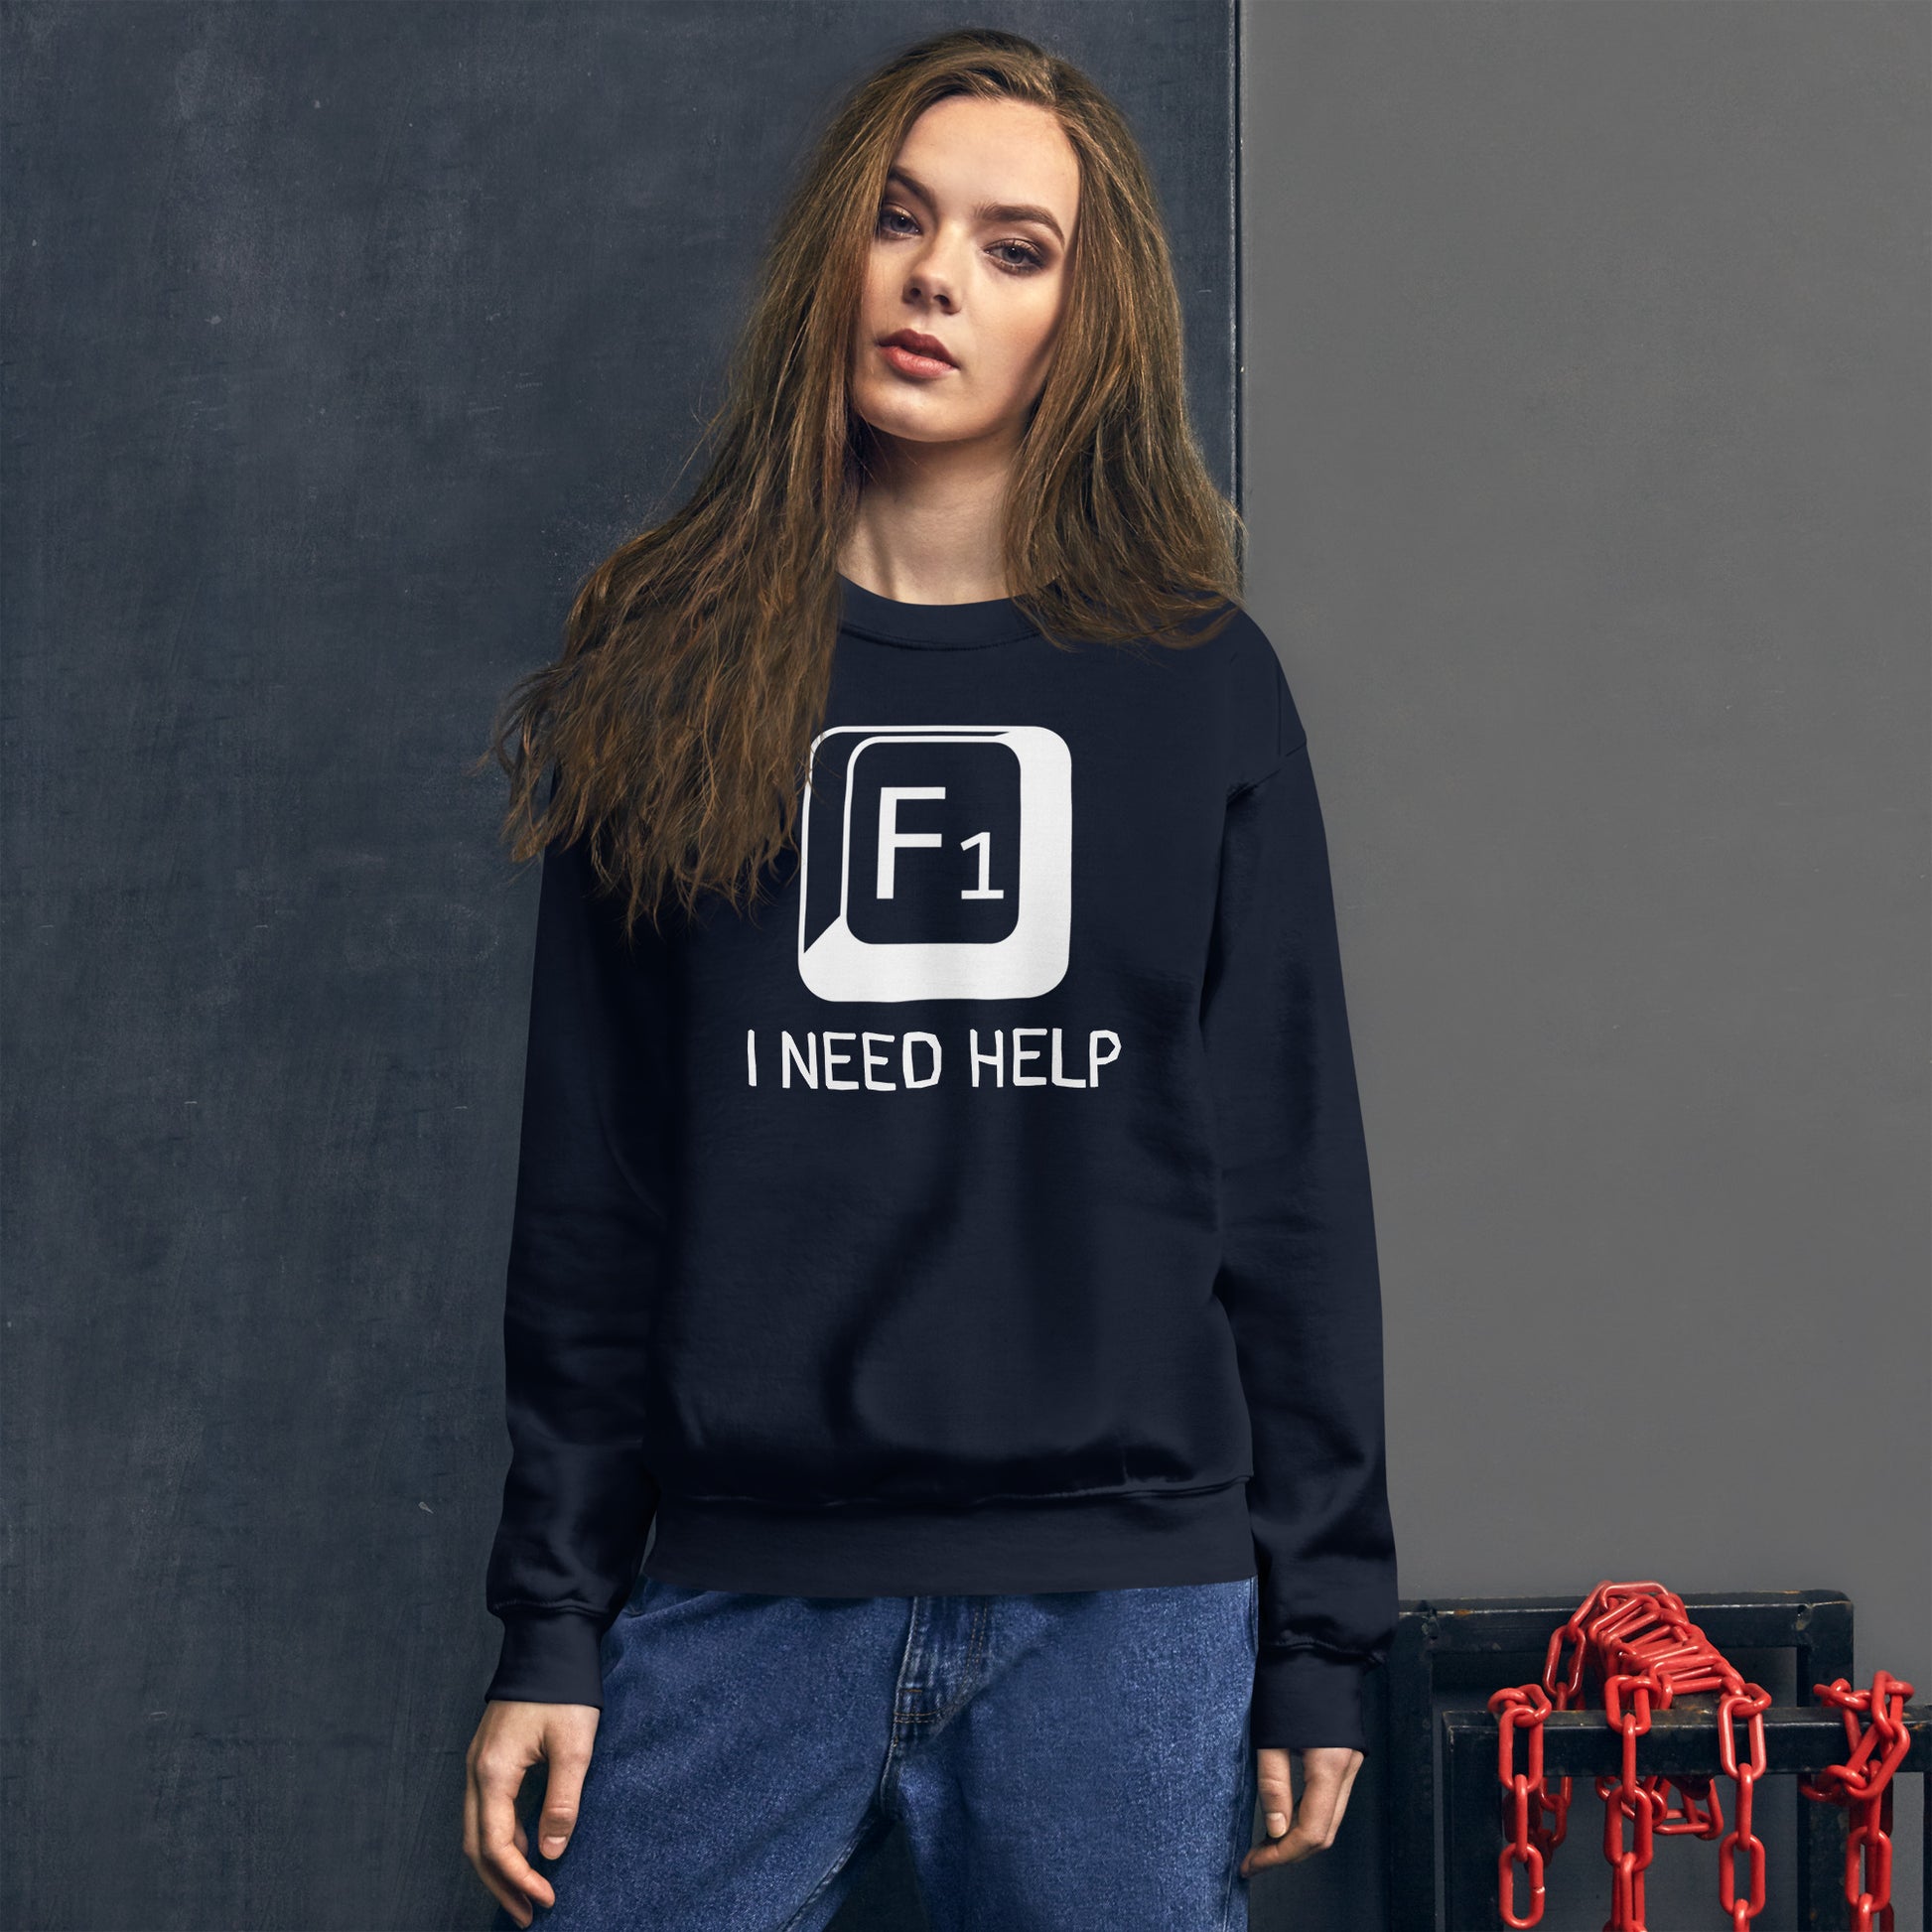 Women with navy sweatshirt and a picture of F1 key with text "I need help"